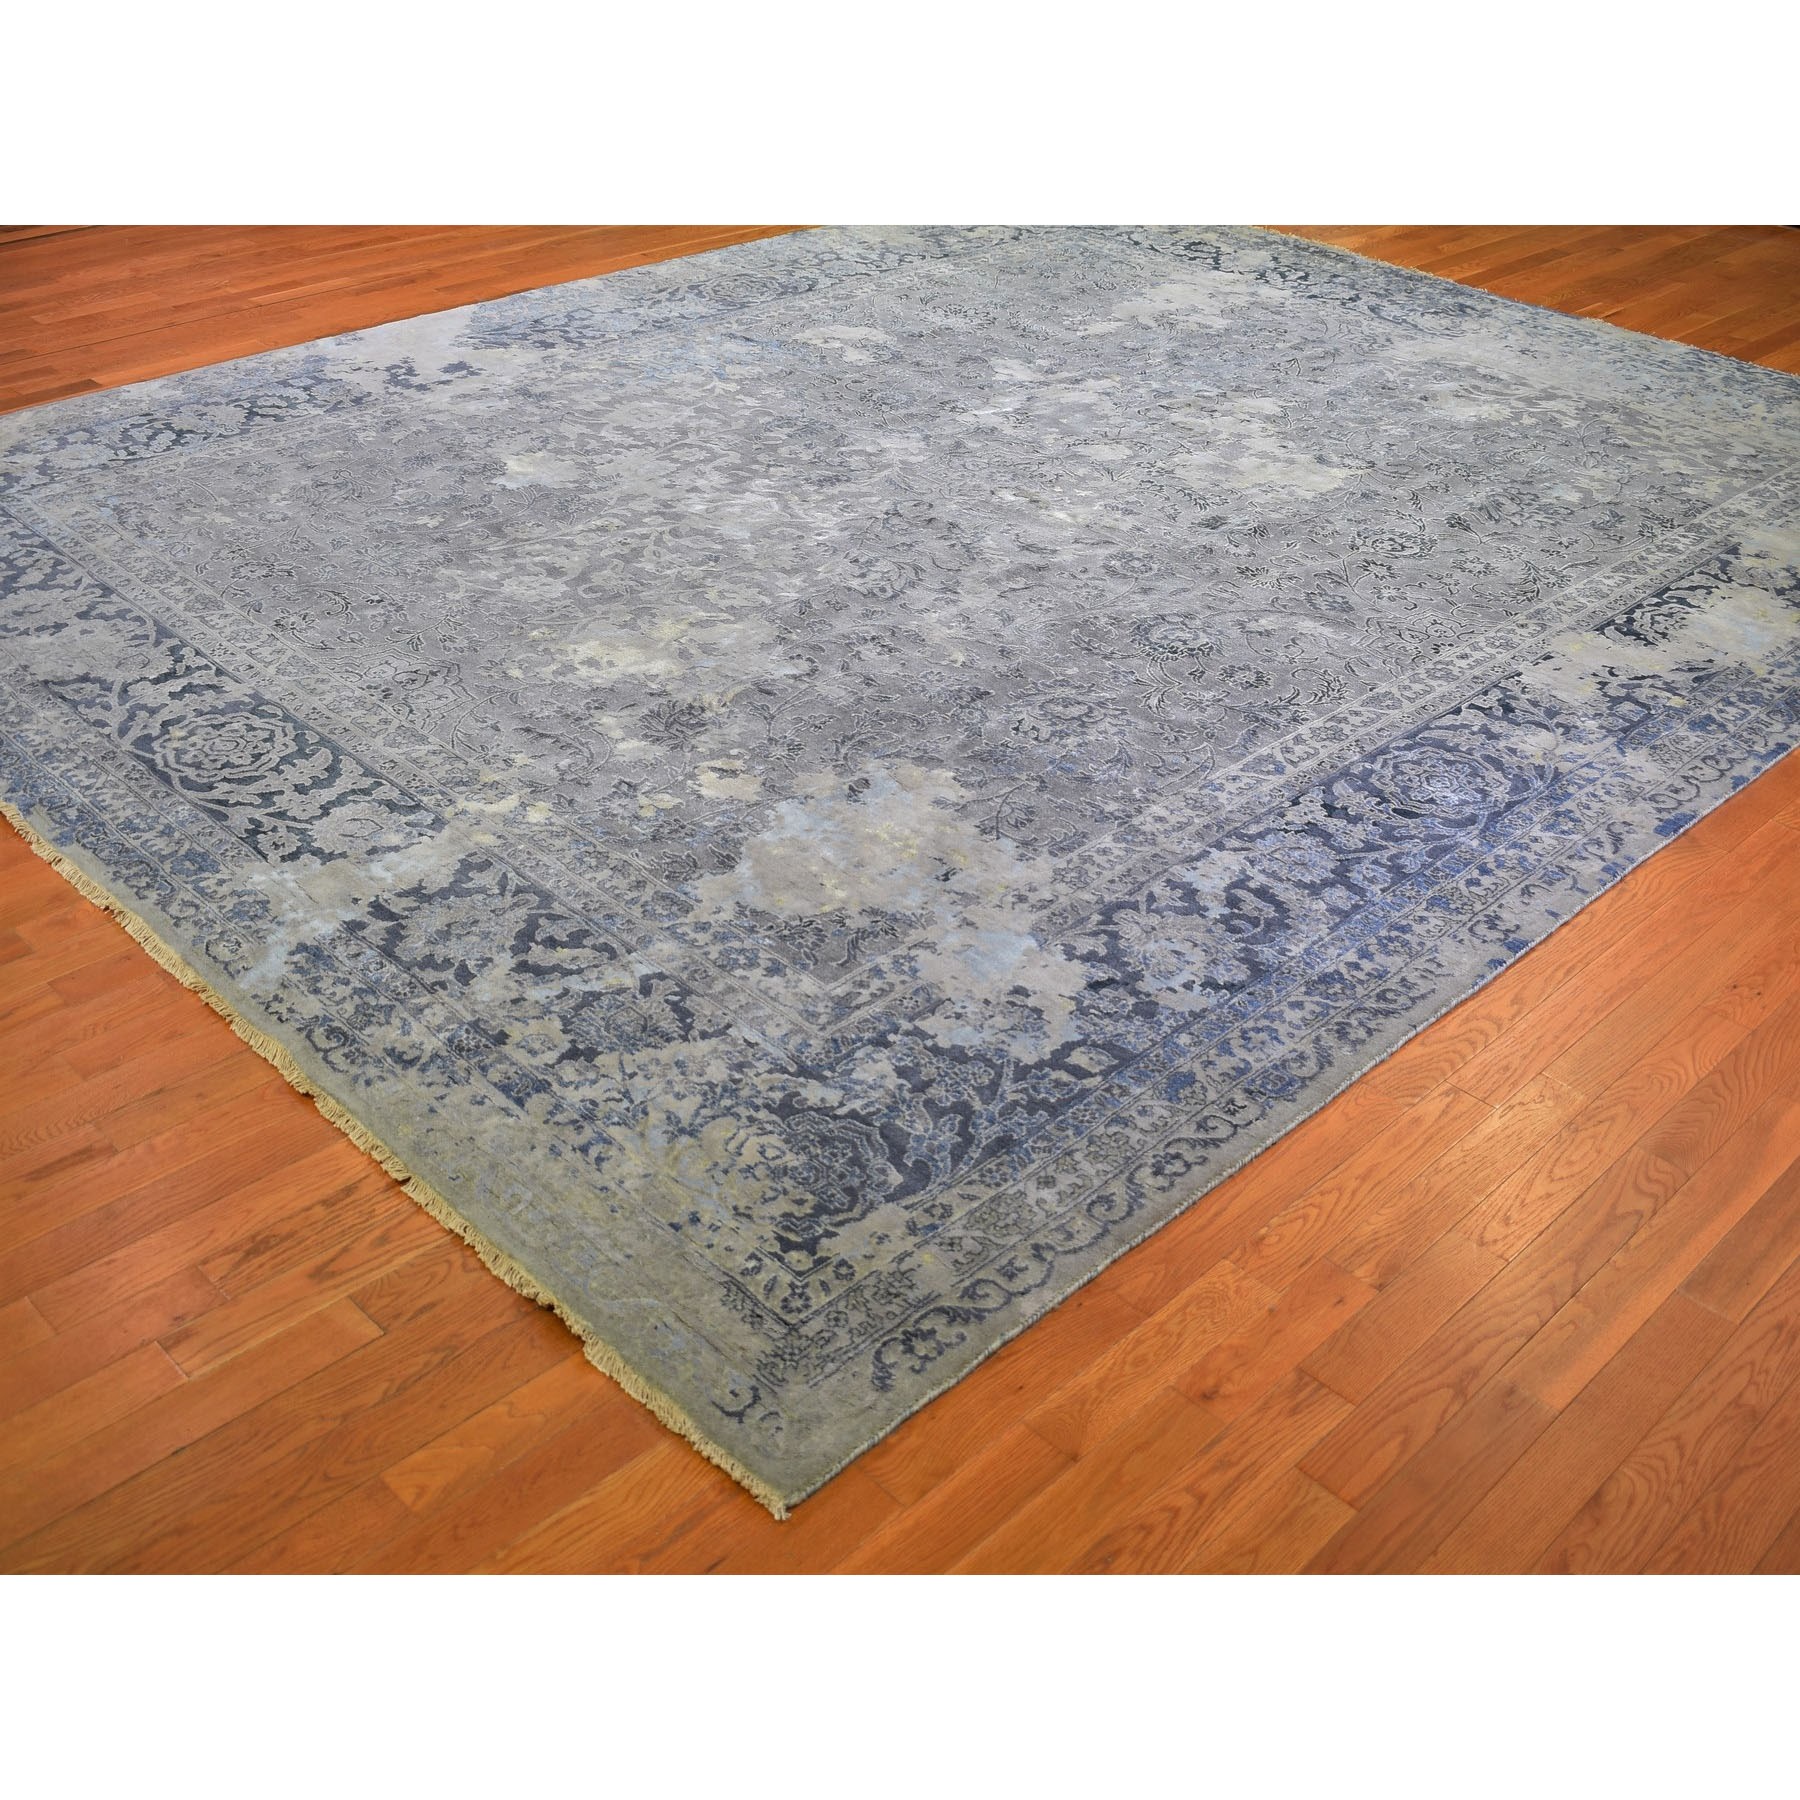 12-1 x15-1  Oversized Gray Broken Persian Design Wool With Pure Silk Hand Knotted Oriental Rug 